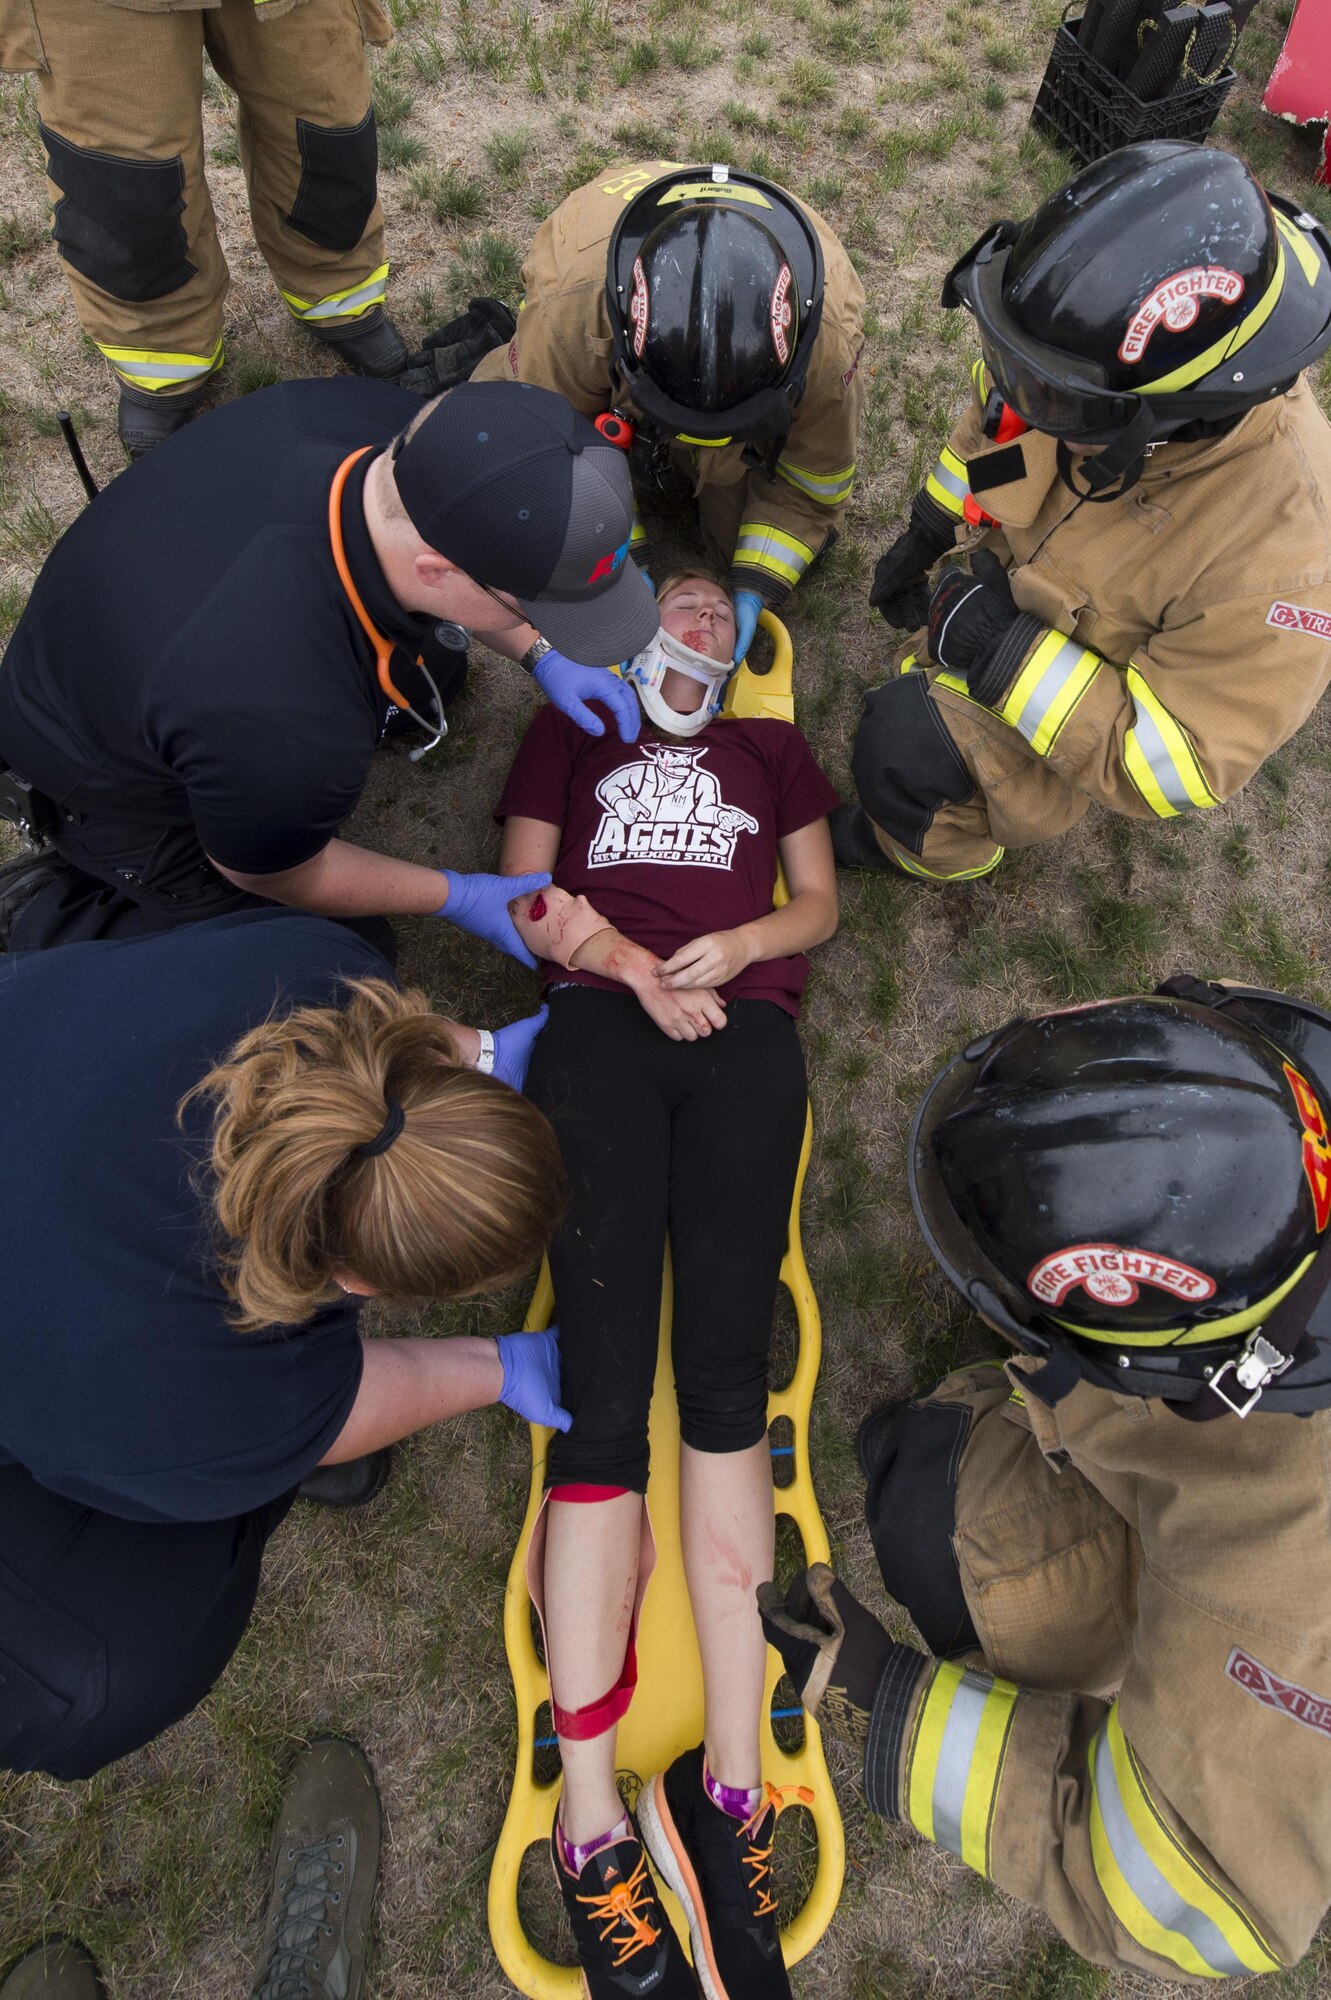 Airman 1st Class Piper Whetstone, a 90th Civil Engineering Squadron firefighter, is assessed for injuries on a gurney during a drinking and driving awareness event at F.E. Warren Air Force Base, Wyo., June 30, 2016. The incident scenario involved multiple emergency response resources from on and off base. More than 200 Airman from the 90th Missile Wing attended the event to witness firsthand the devastating effects of a DUI.  (U.S. Air Force photo by Staff Sgt. Christopher Ruano)